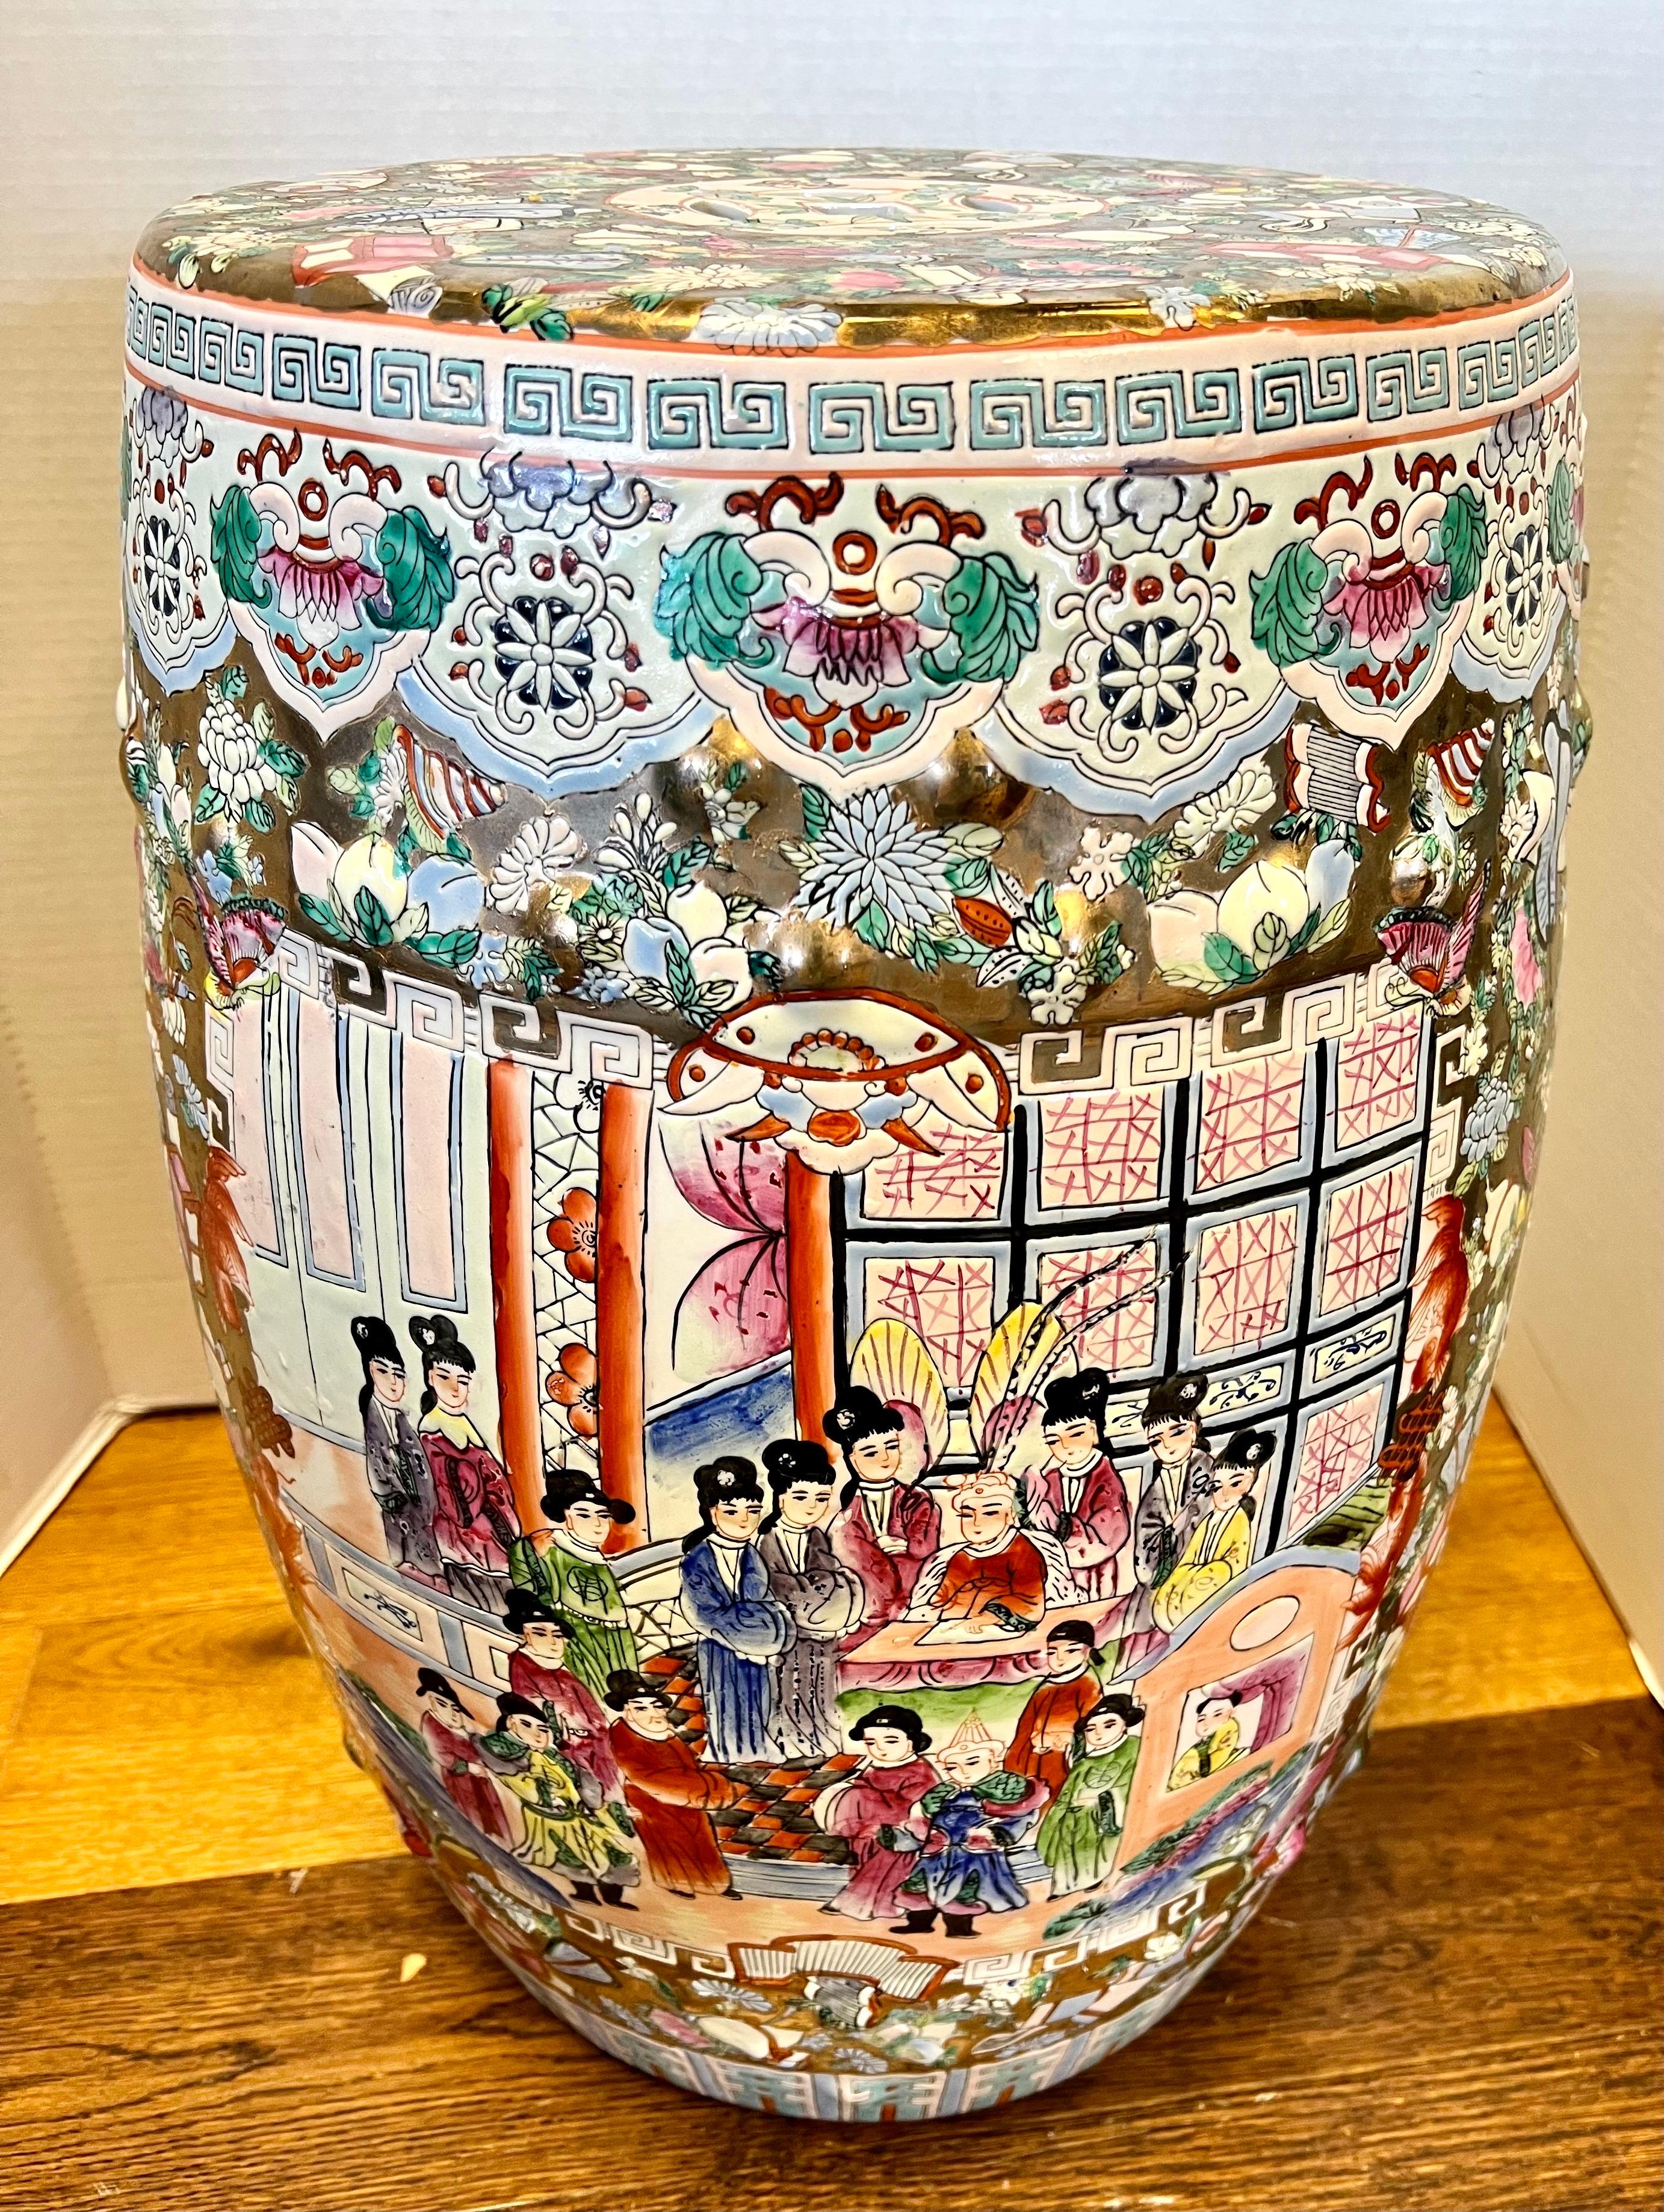 Exquisite Chinese export porcelain rose medallion garden seat with barrel form. Features colorful hand painted scenery and floral motif. Unmarked.